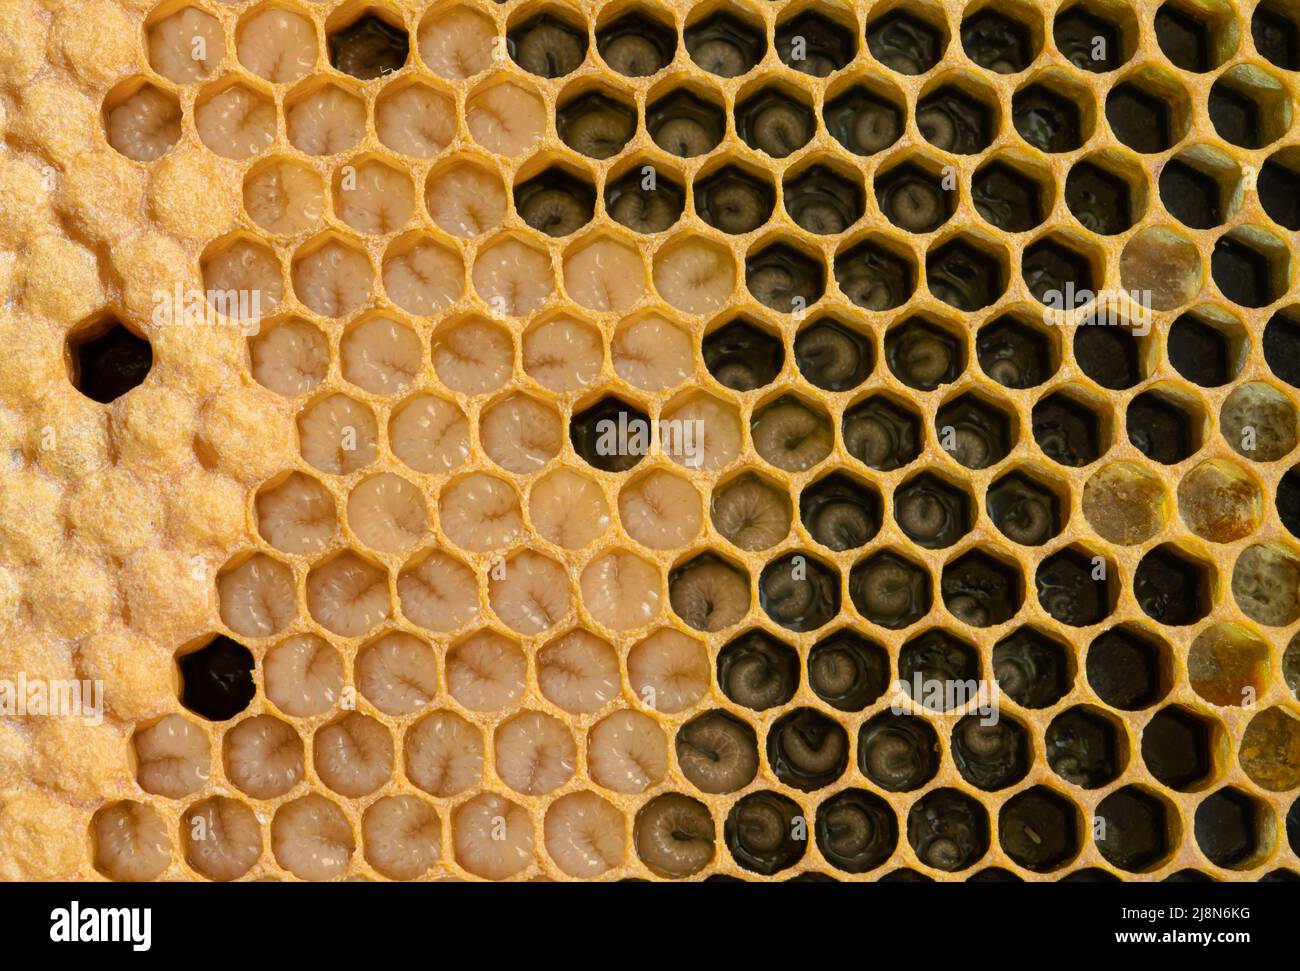 Honey Bee Brood Frame with Eggs, Larva, and Capped Brood Stock Photo